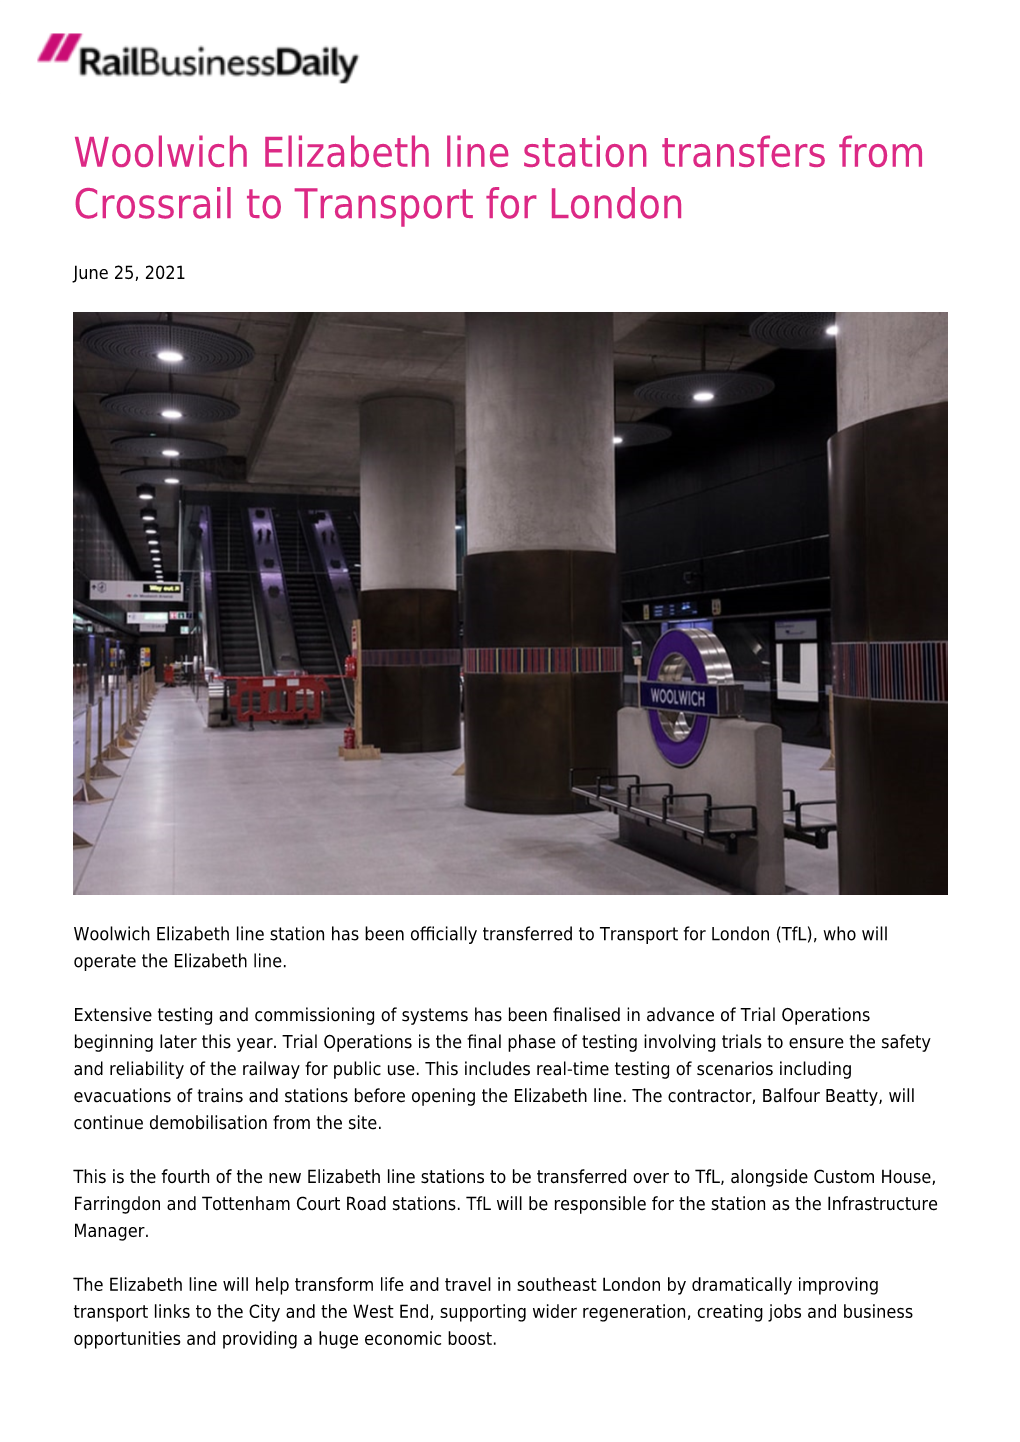 Woolwich Elizabeth Line Station Transfers from Crossrail to Transport for London